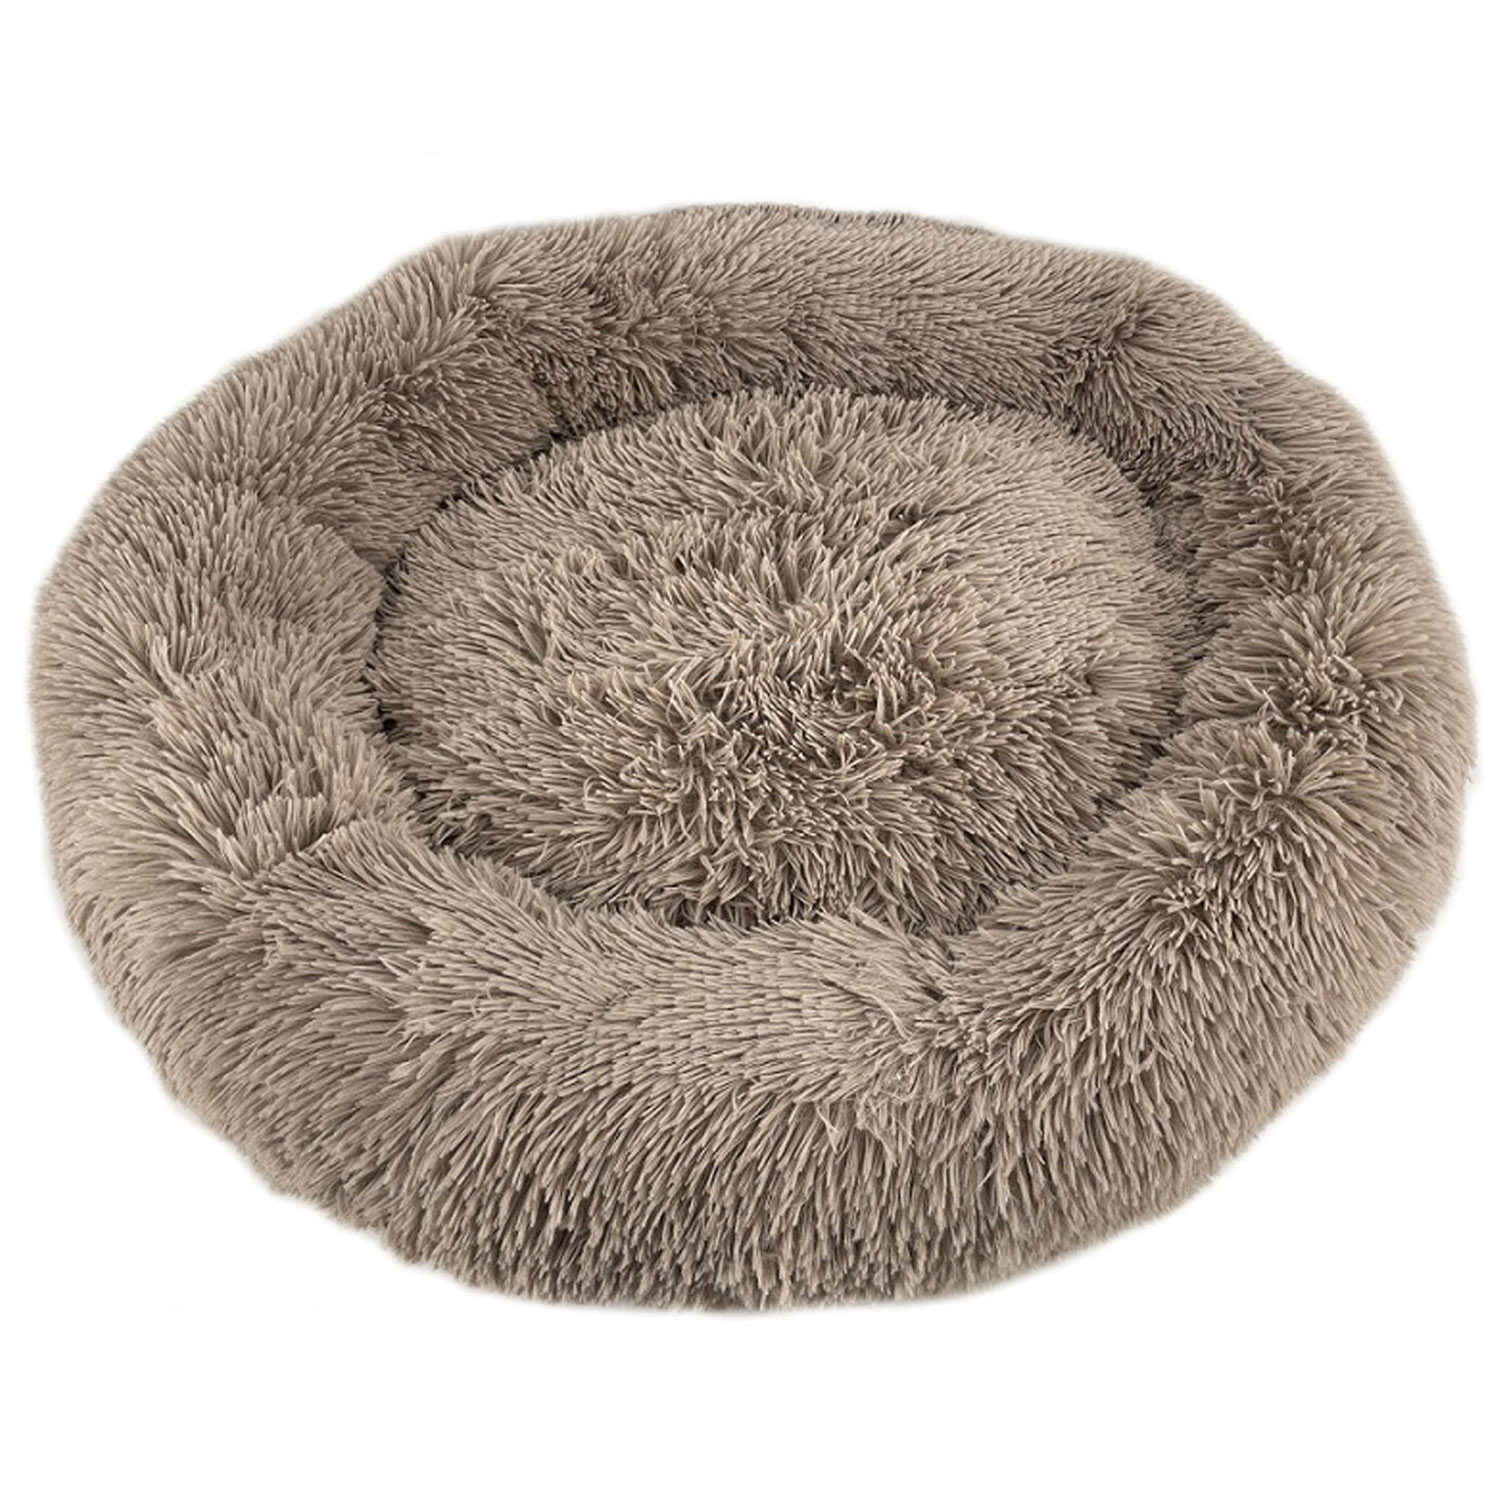 Clever Paws Beige Medium Calming Bed Image